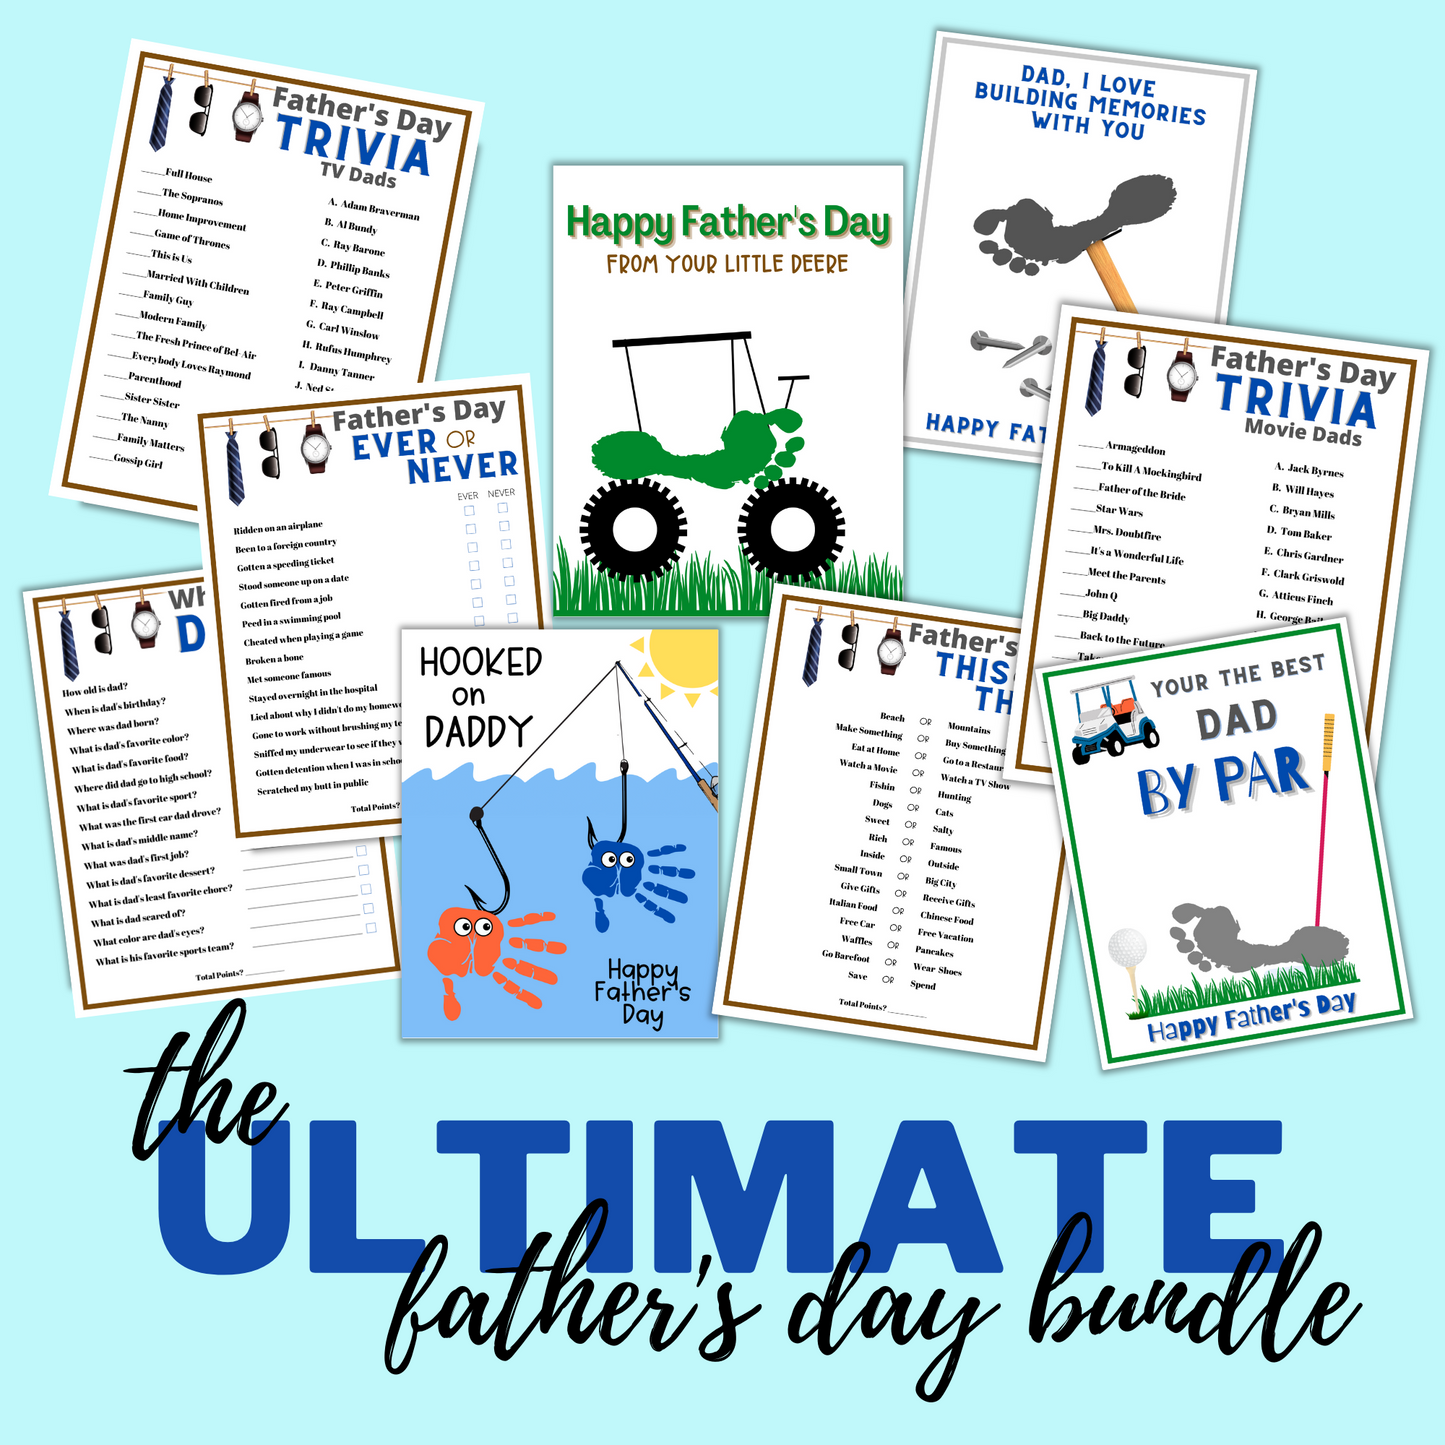 The Ultimate Father's Day Bundle